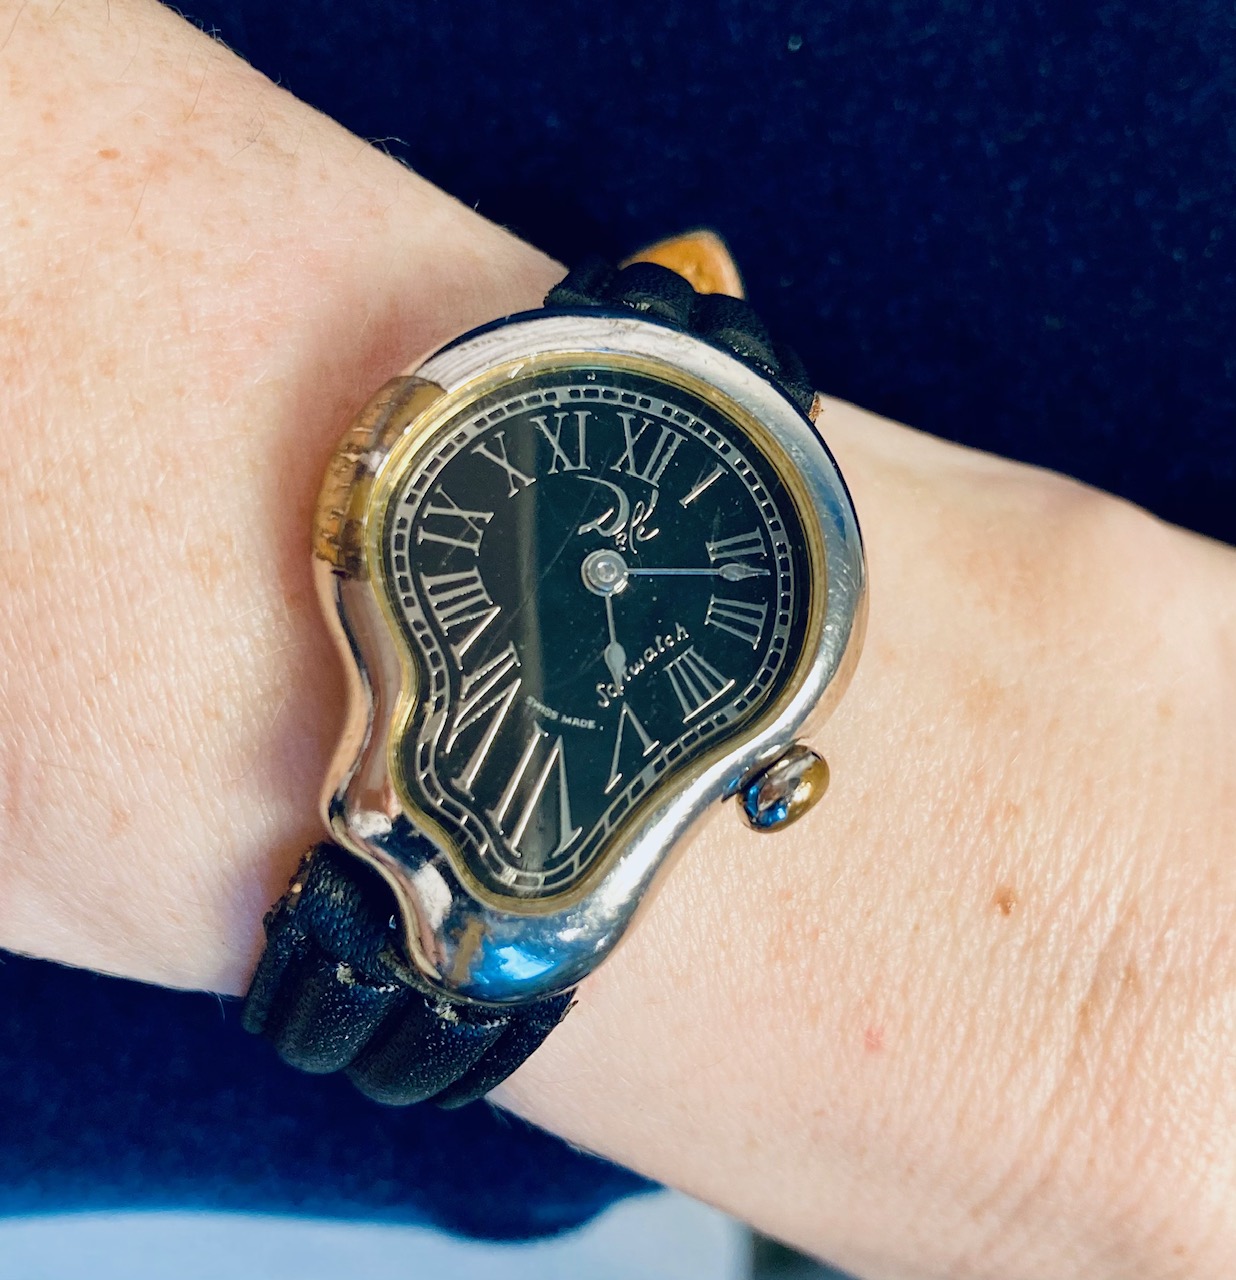 Owner Review: Dali Soft Watch – The Persistence of Memory